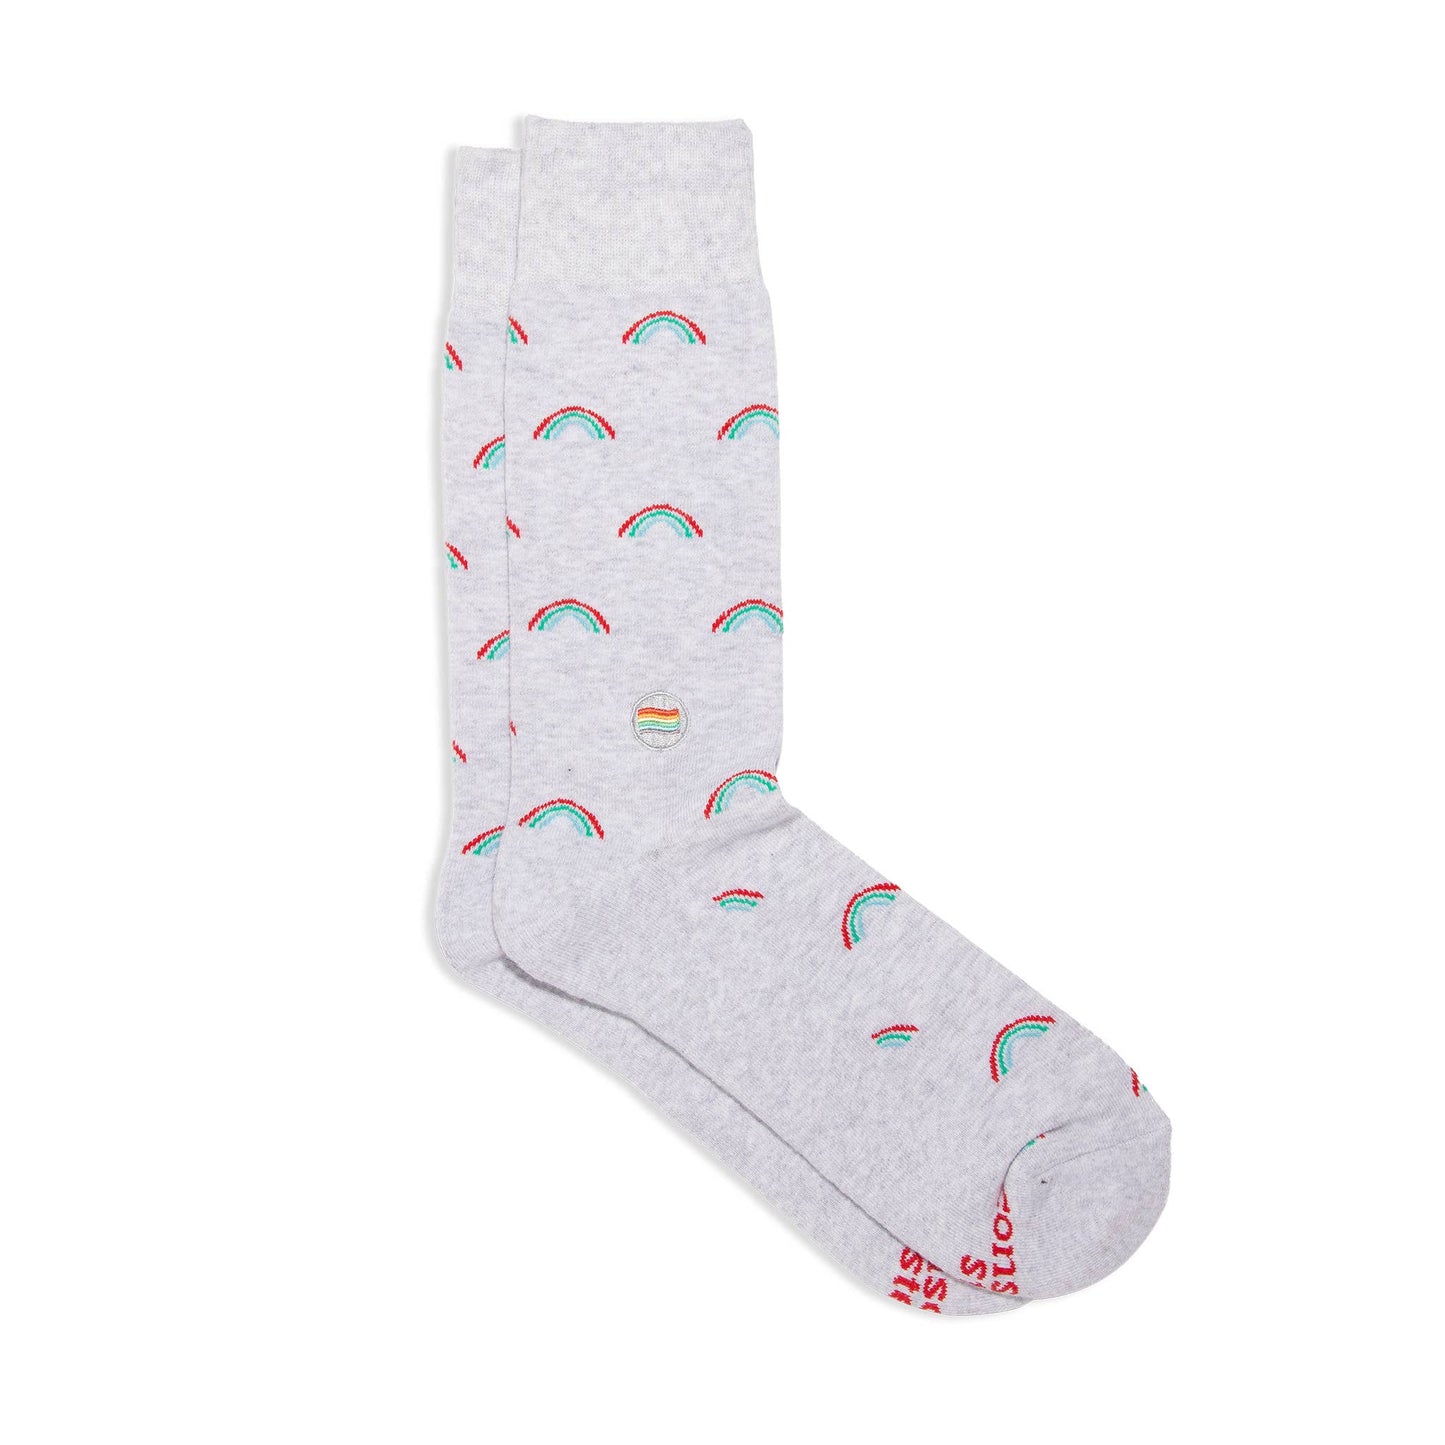 Conscious Step - Socks that Save LGBTQ Lives (Radiant Rainbows)  Conscious Step Medium  -better made easy-eco-friendly-sustainable-gifting